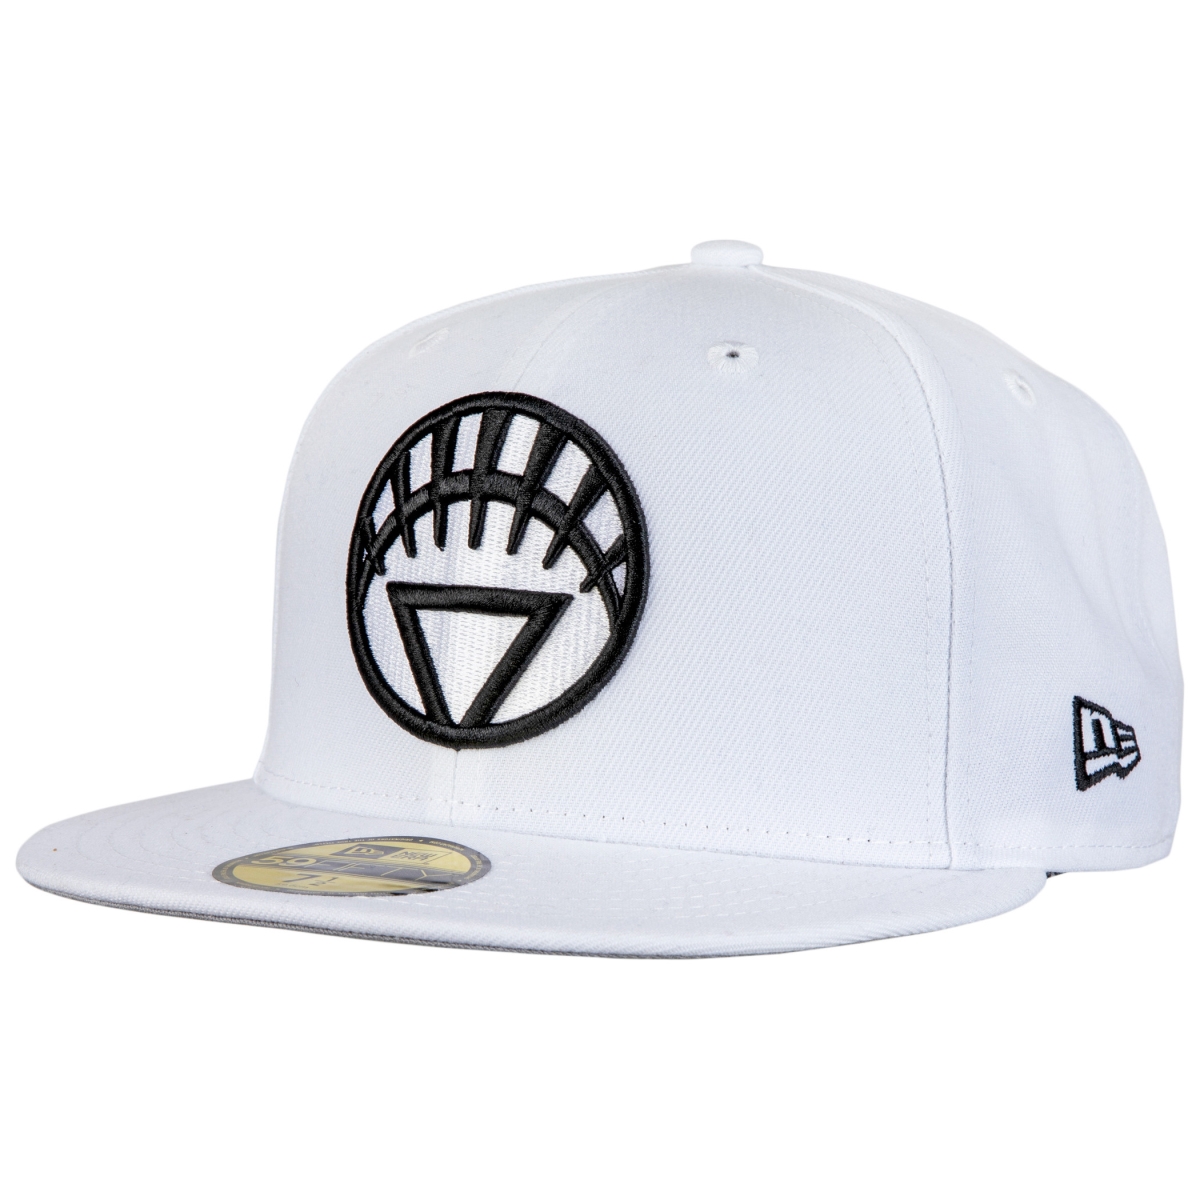 Picture of White Lantern 813903-77-8fitted Color Block New Era 59Fifty Hat, 7.87 Fitted